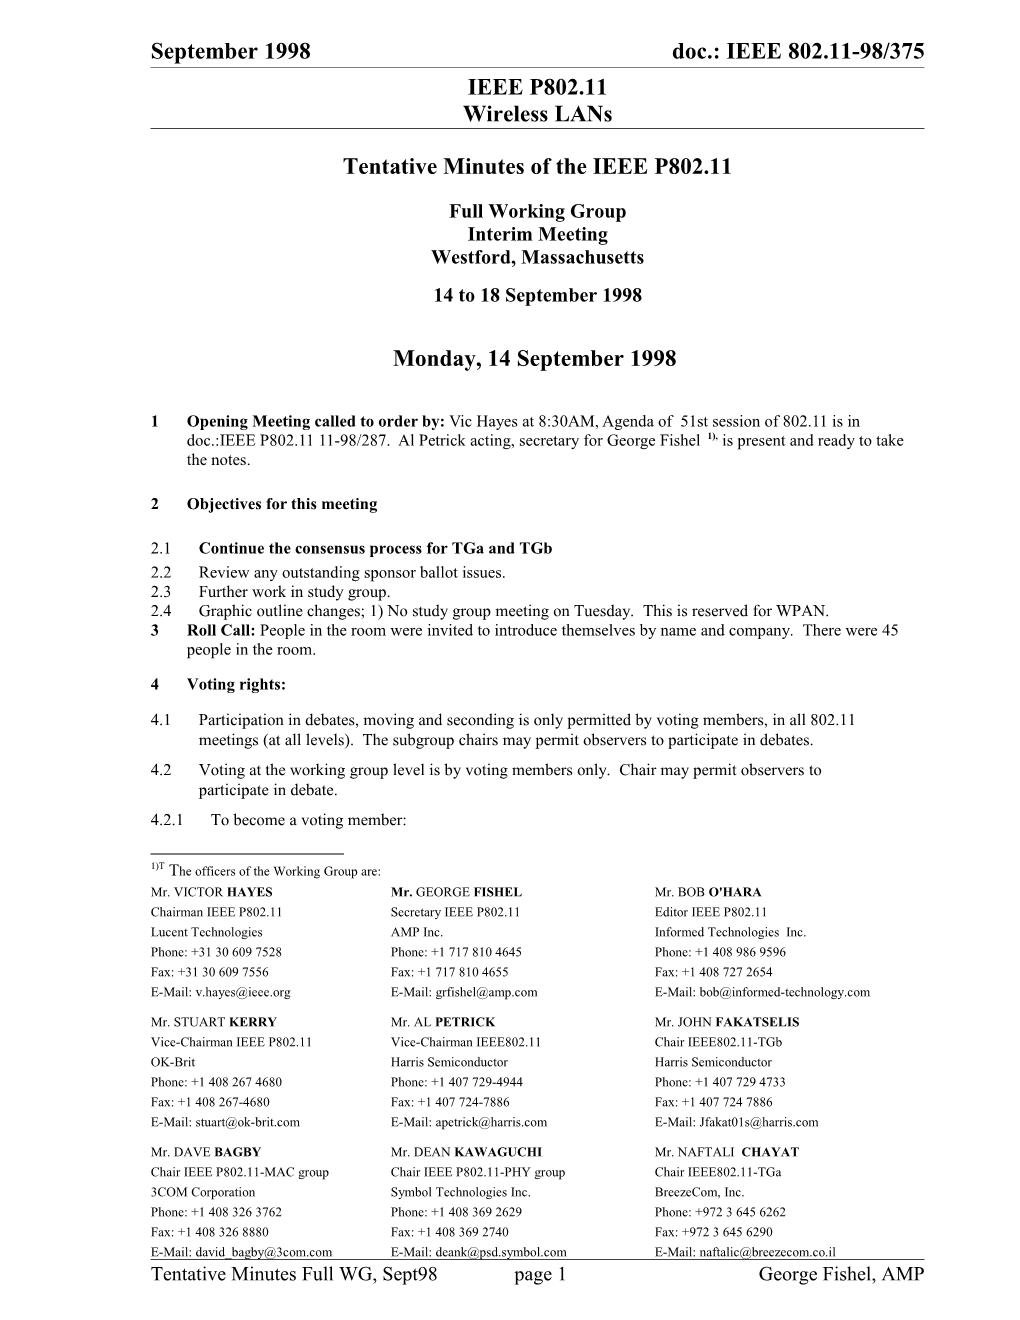 Tentative Minutes of the IEEE P802.11